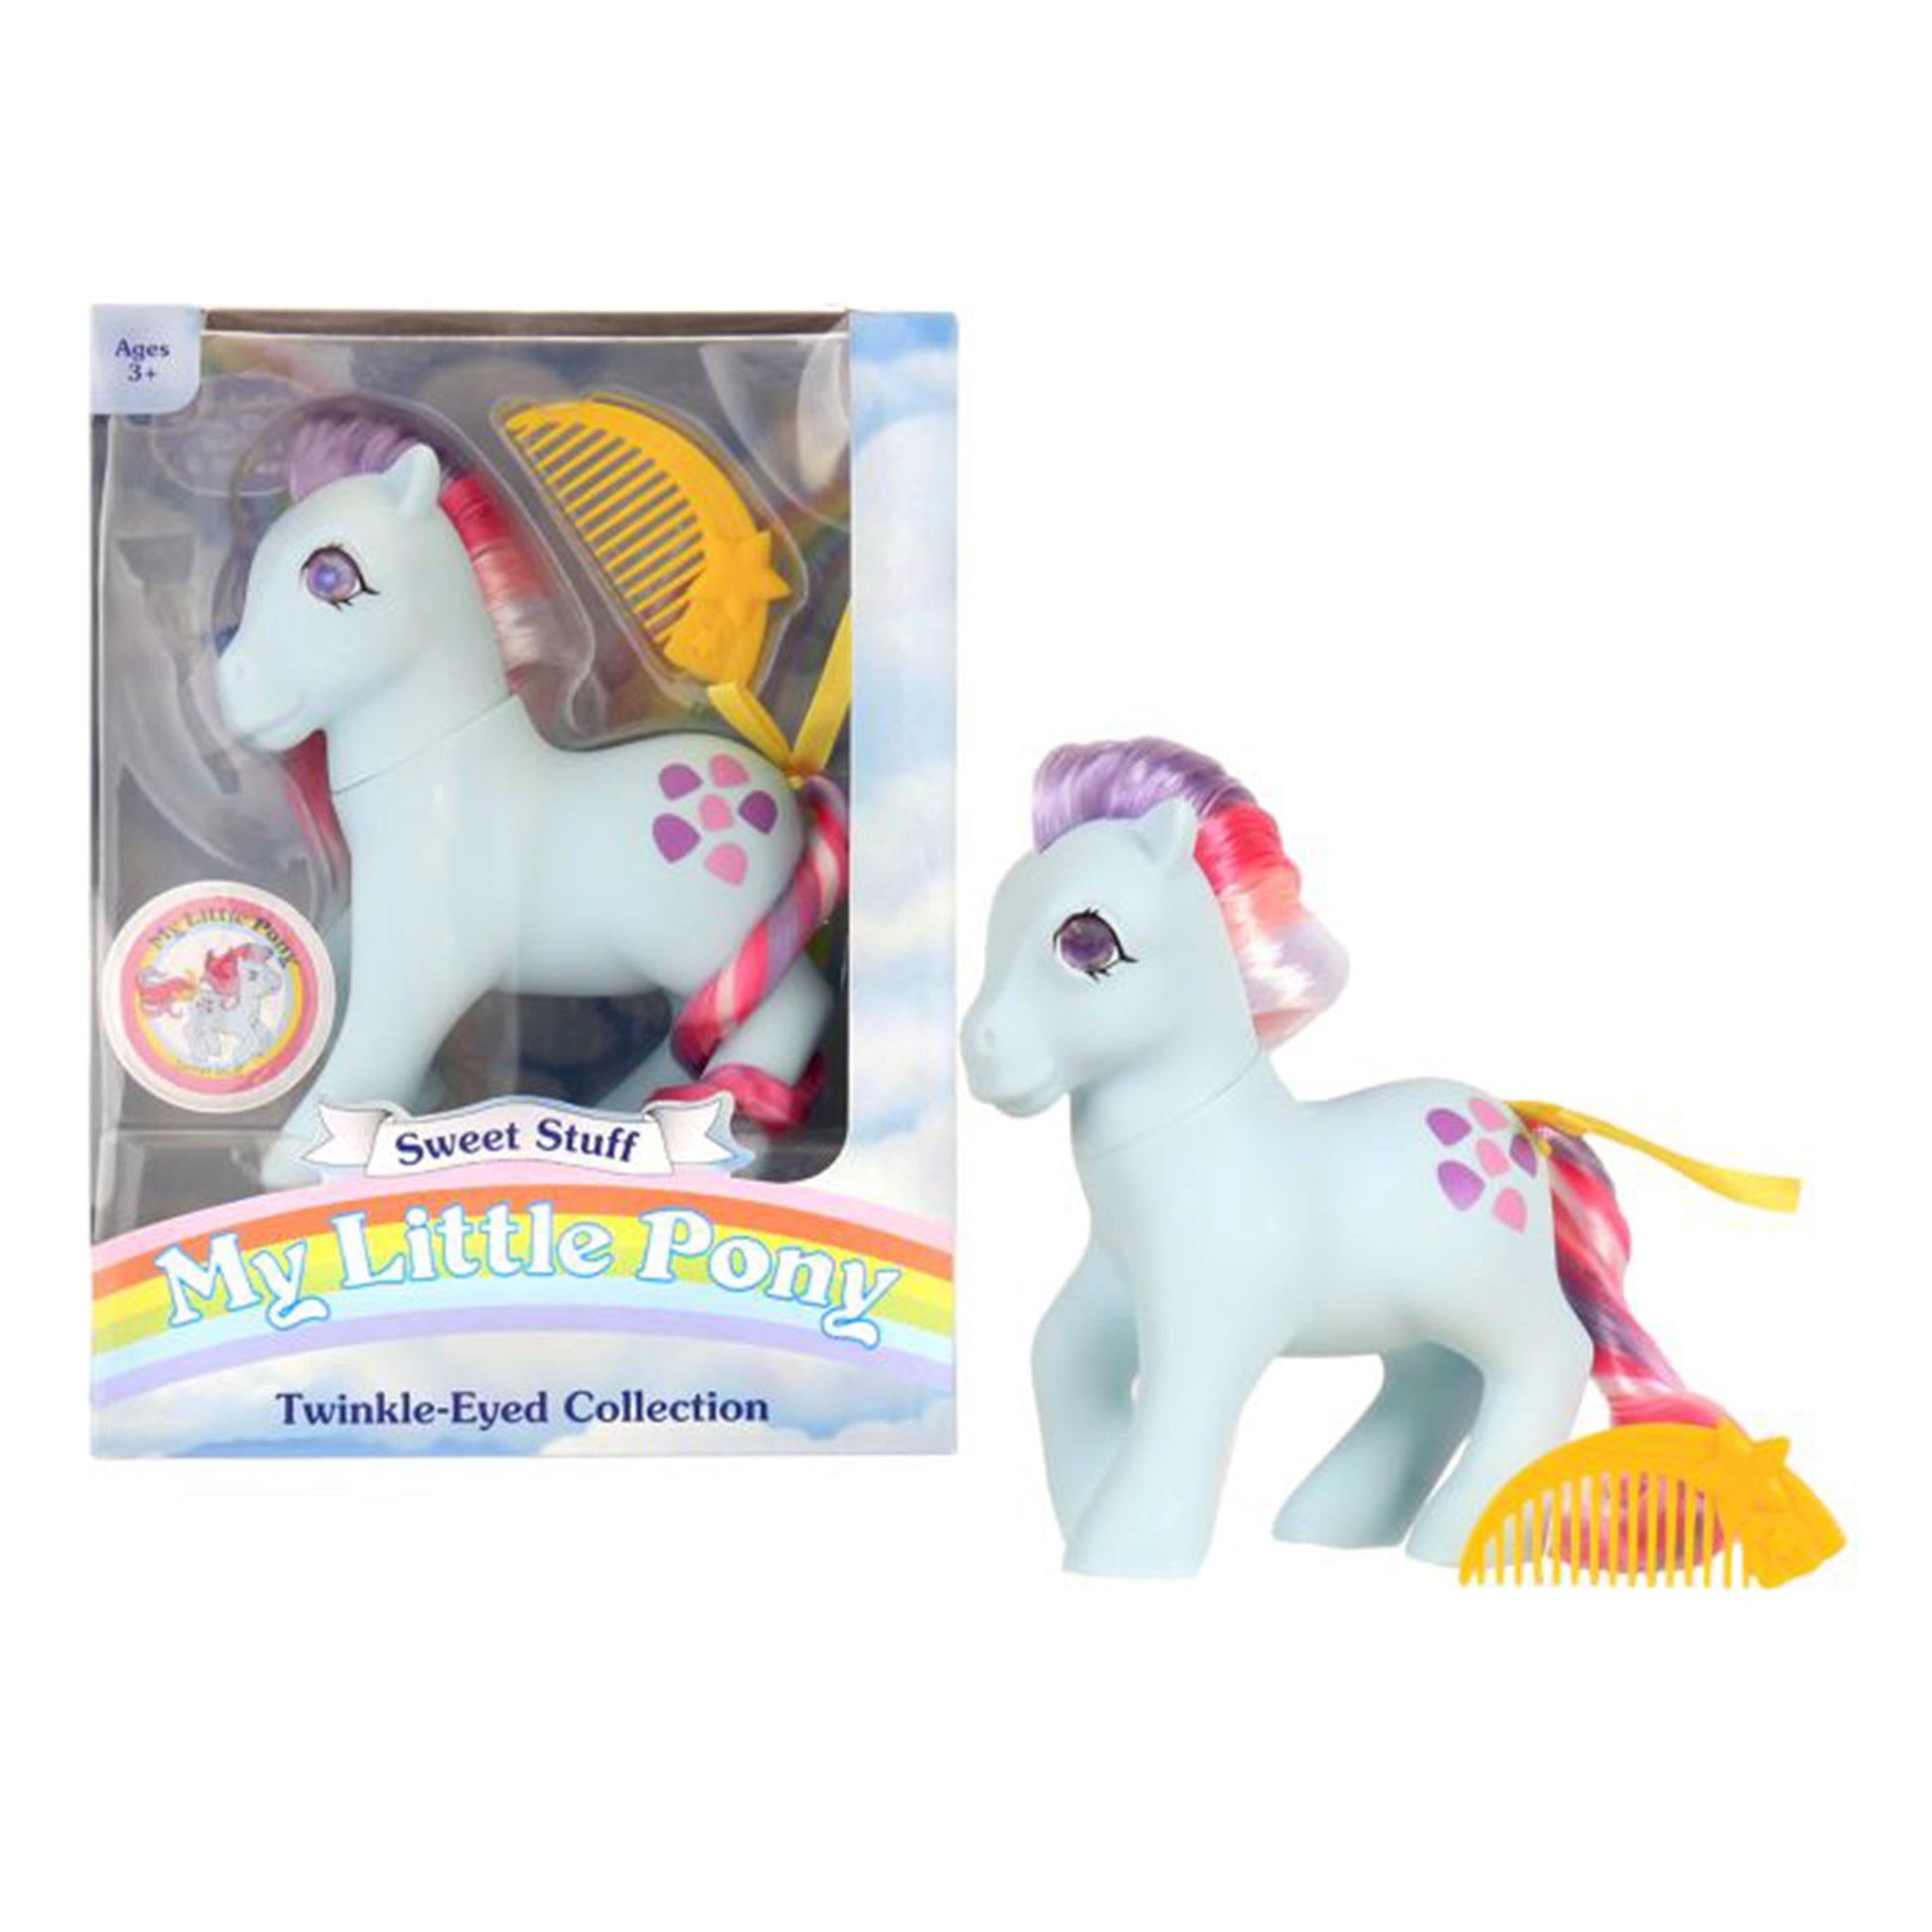 My Little Pony Classics - Sweet Stuff - ABGee - The Forgotten Toy Shop